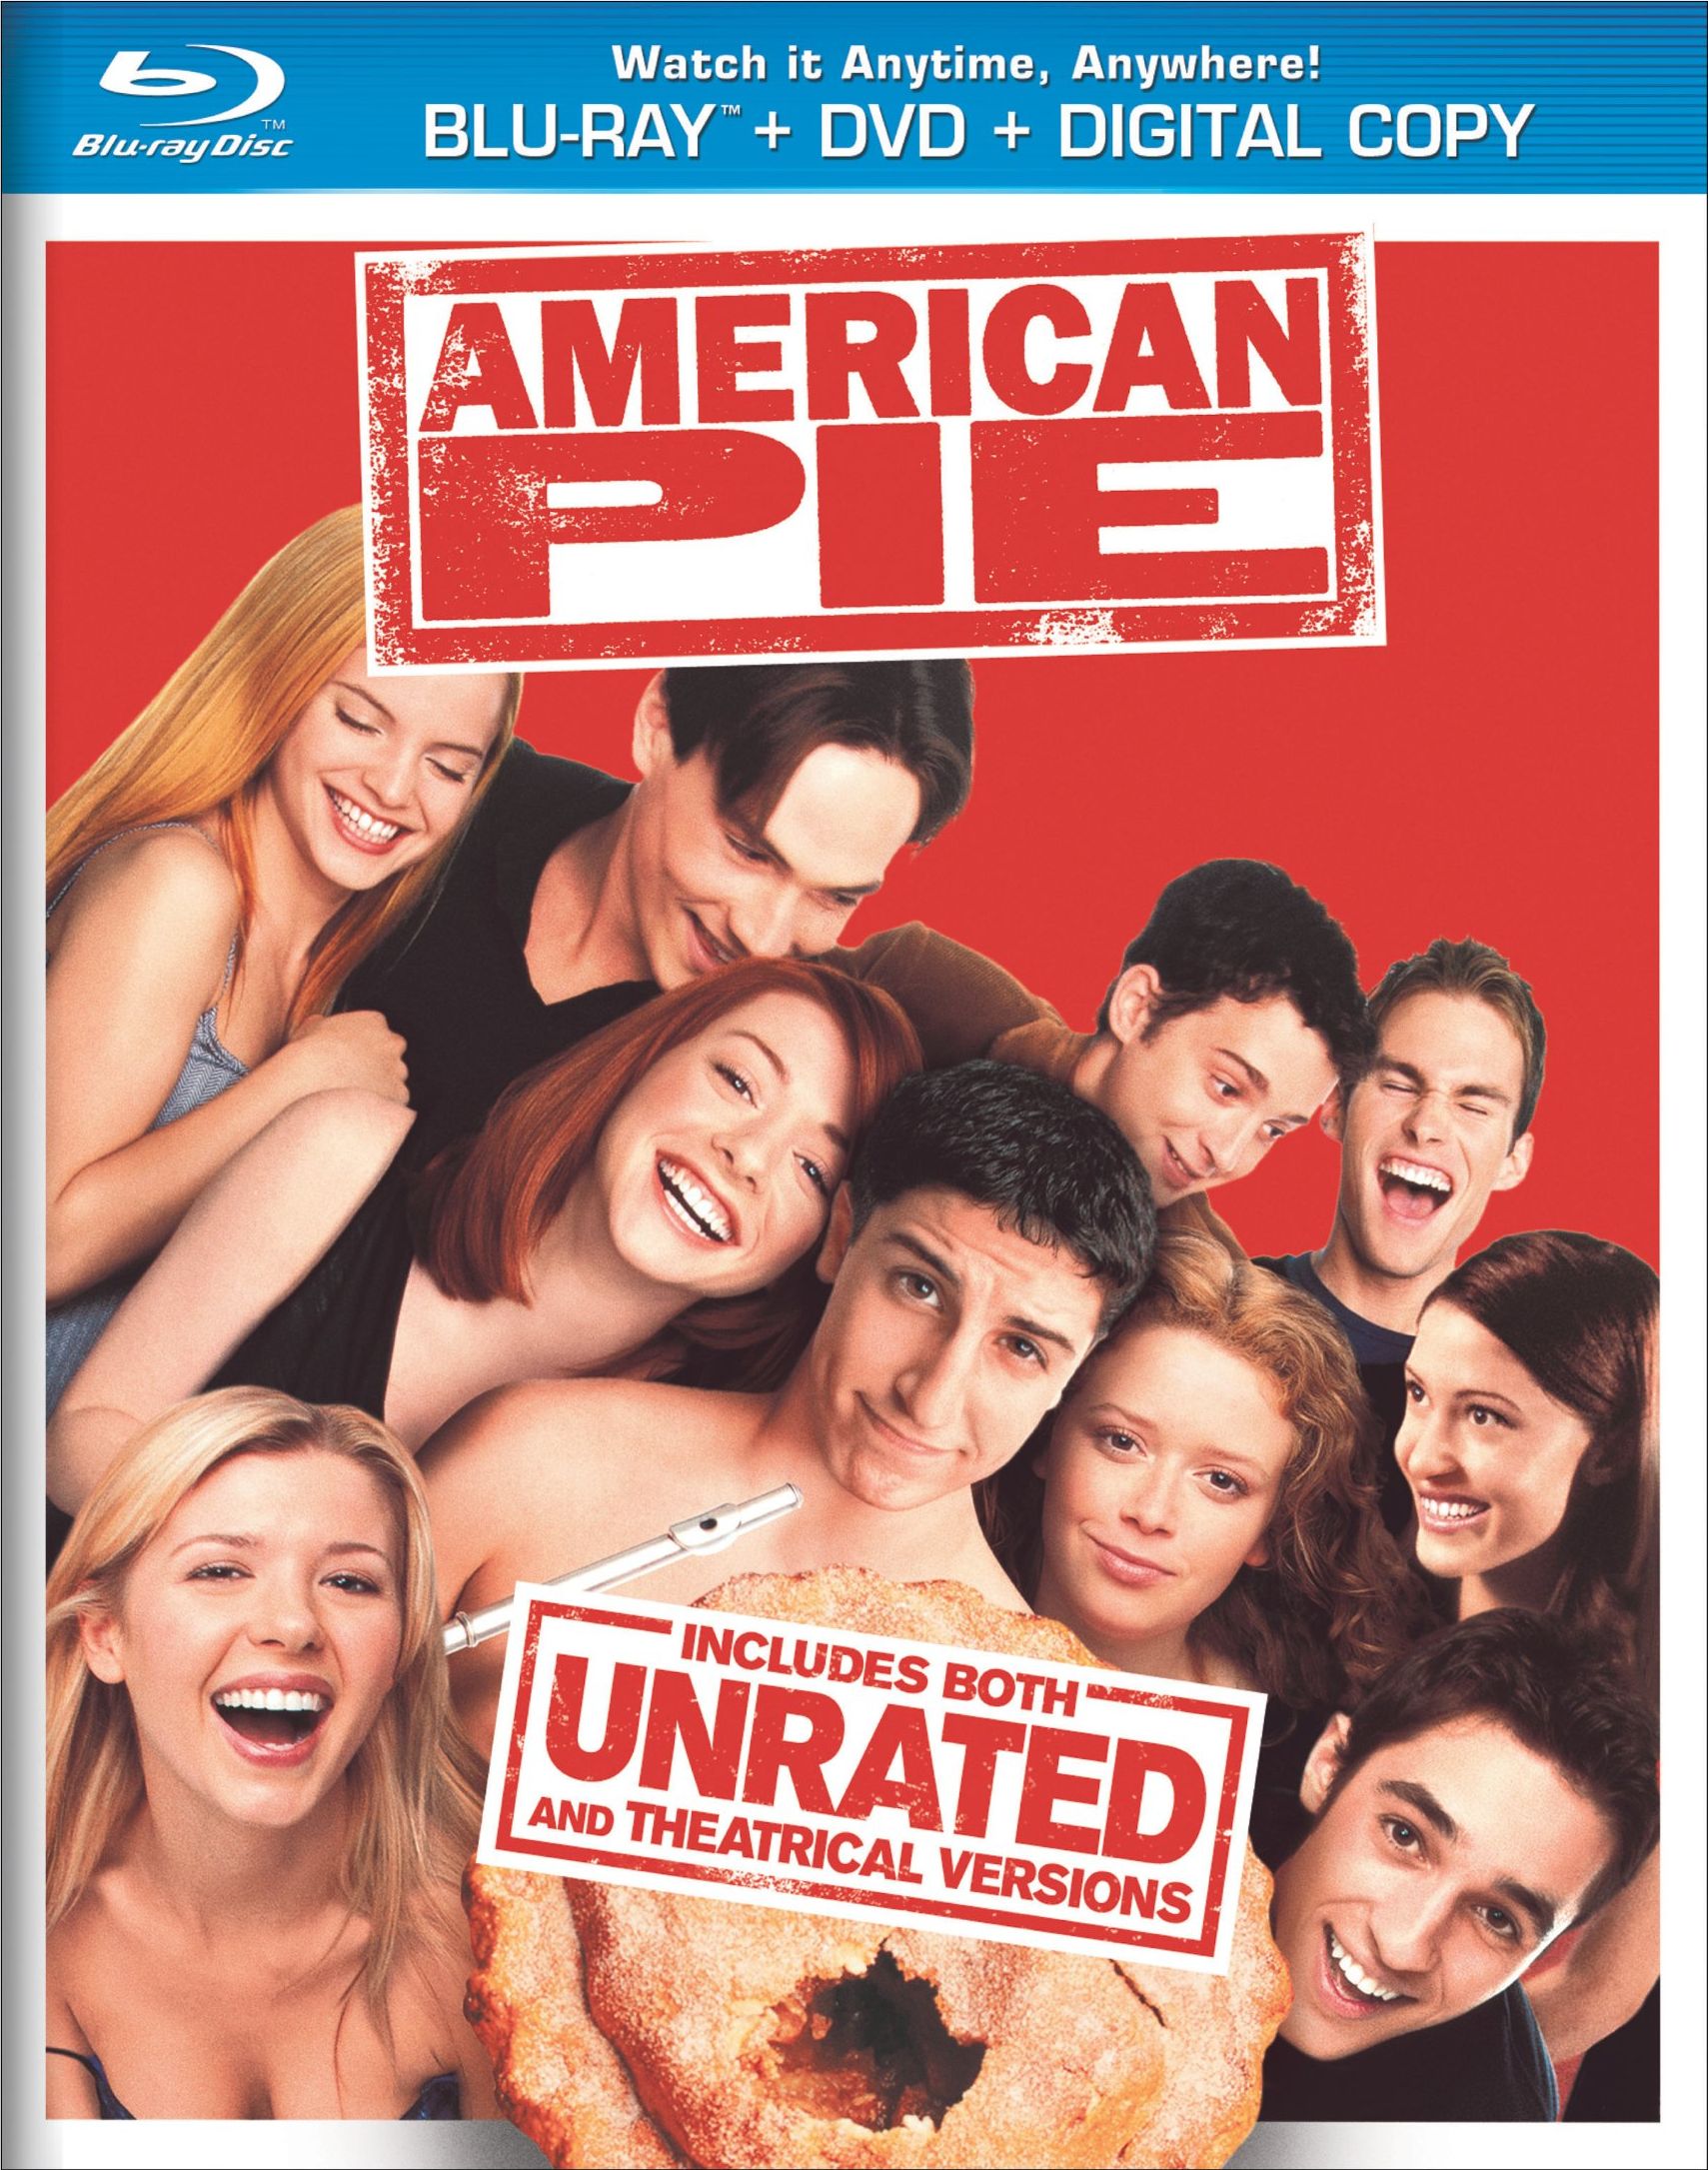 christopher van note recommends watch american pie 2online pic